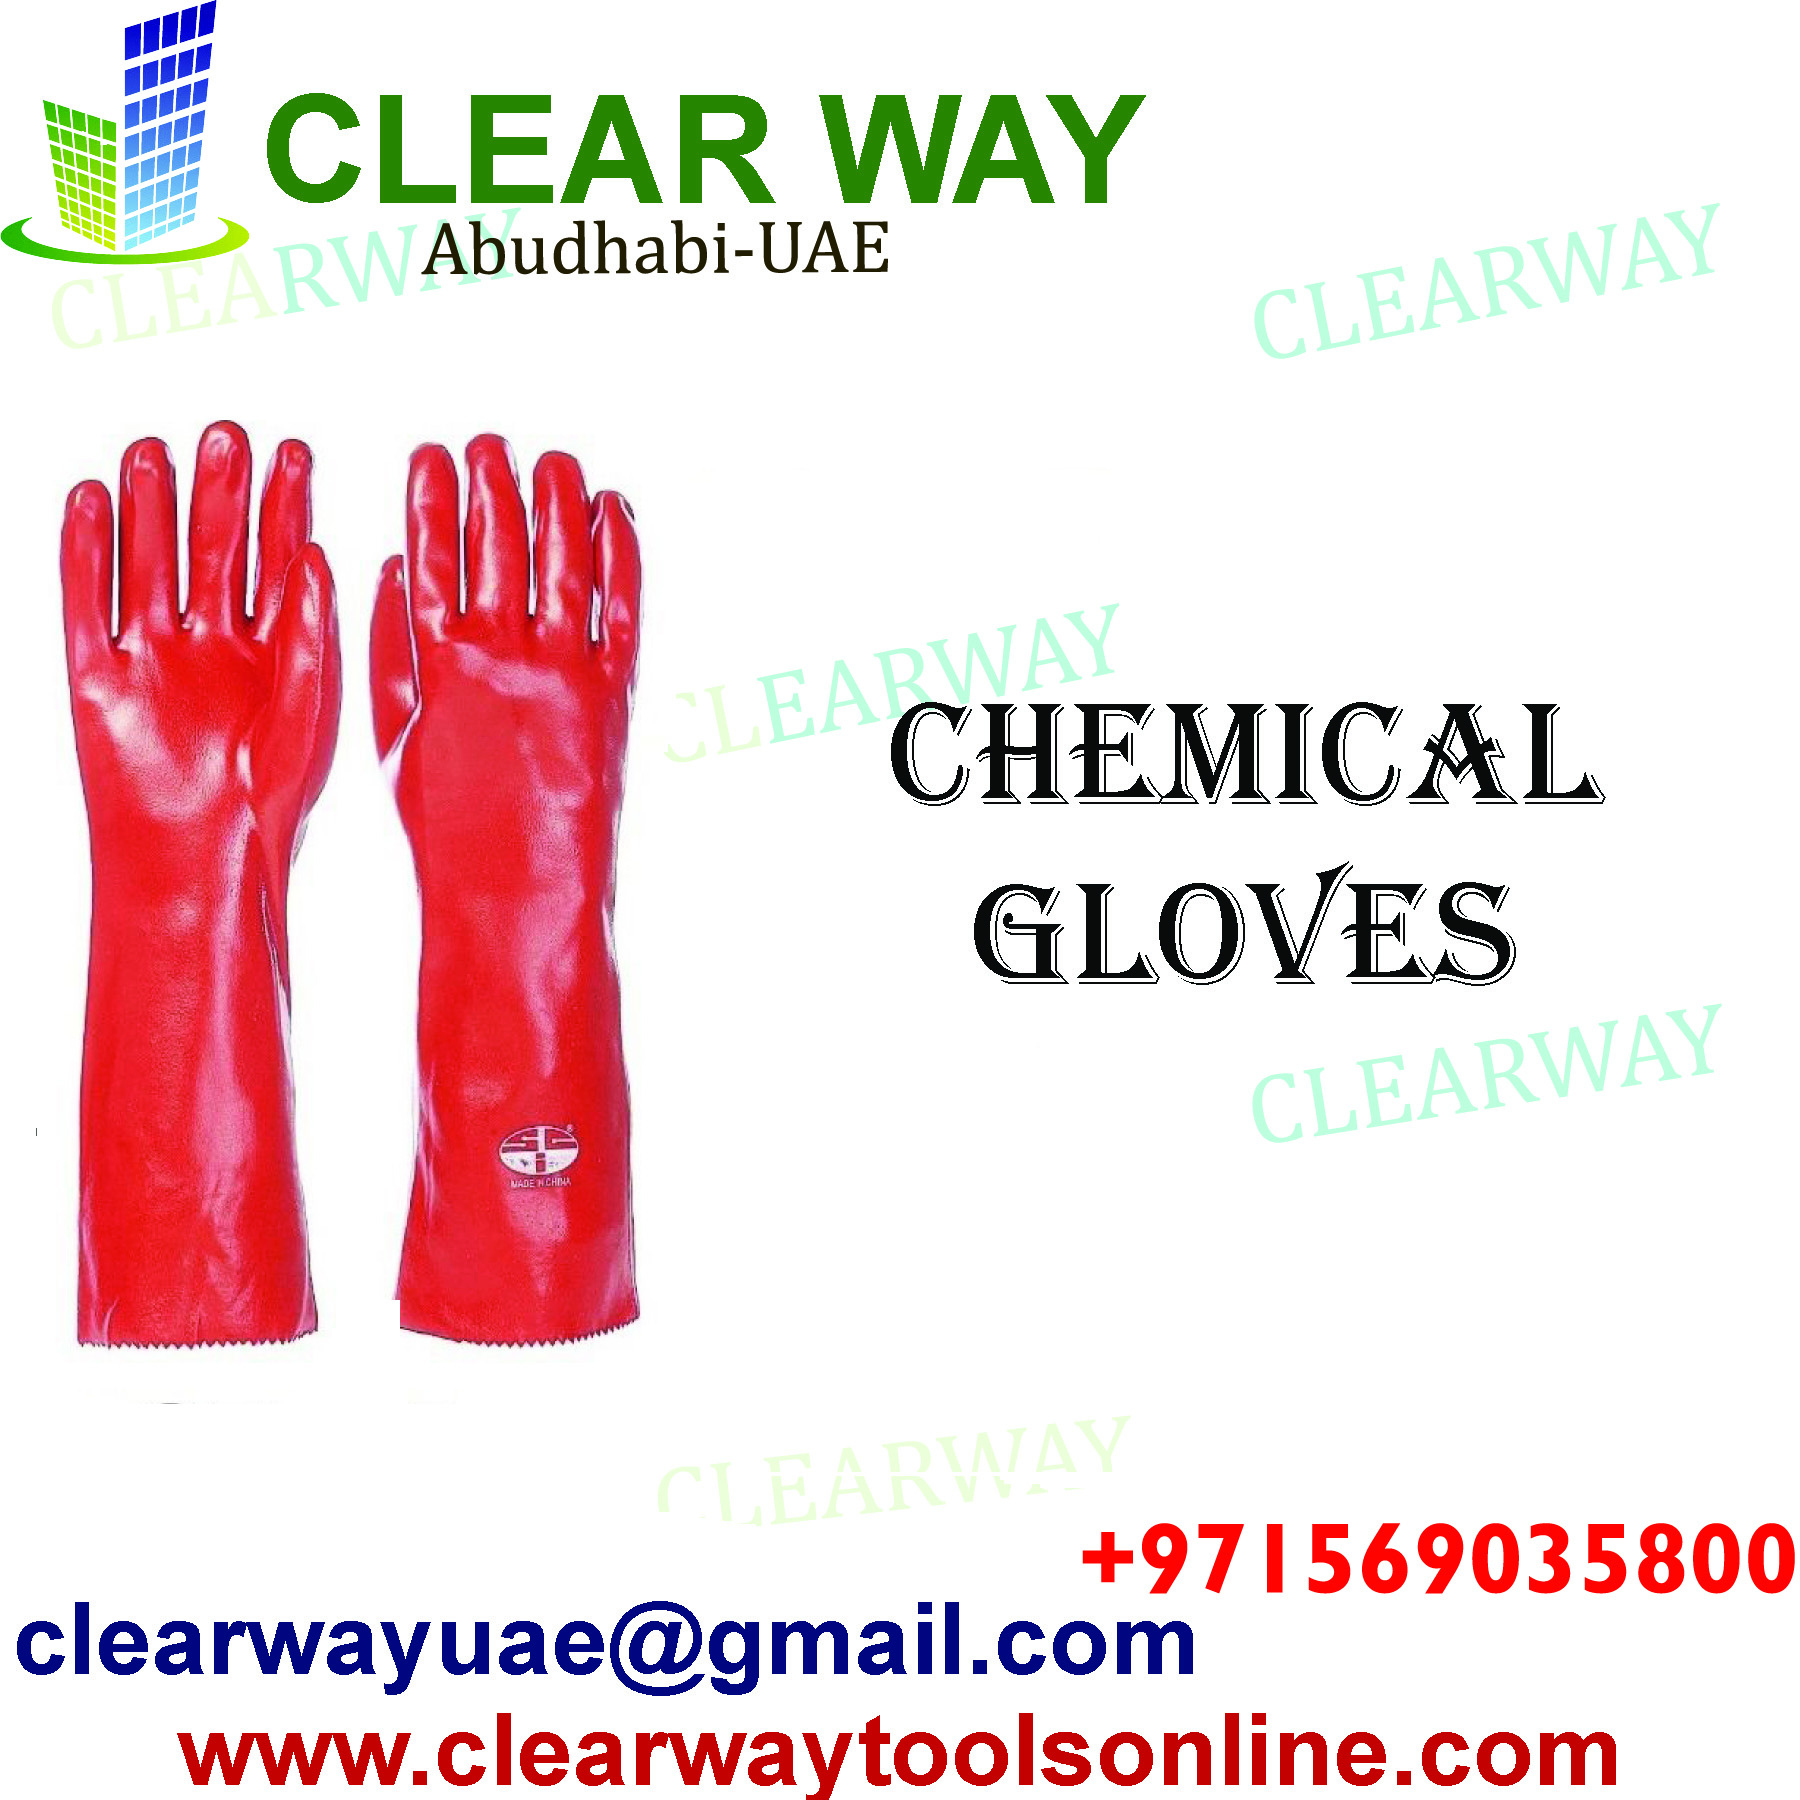 CHEMICAL GLOVES-CLEARWAY-MUSSAFAH-ABUDHABI-UAE